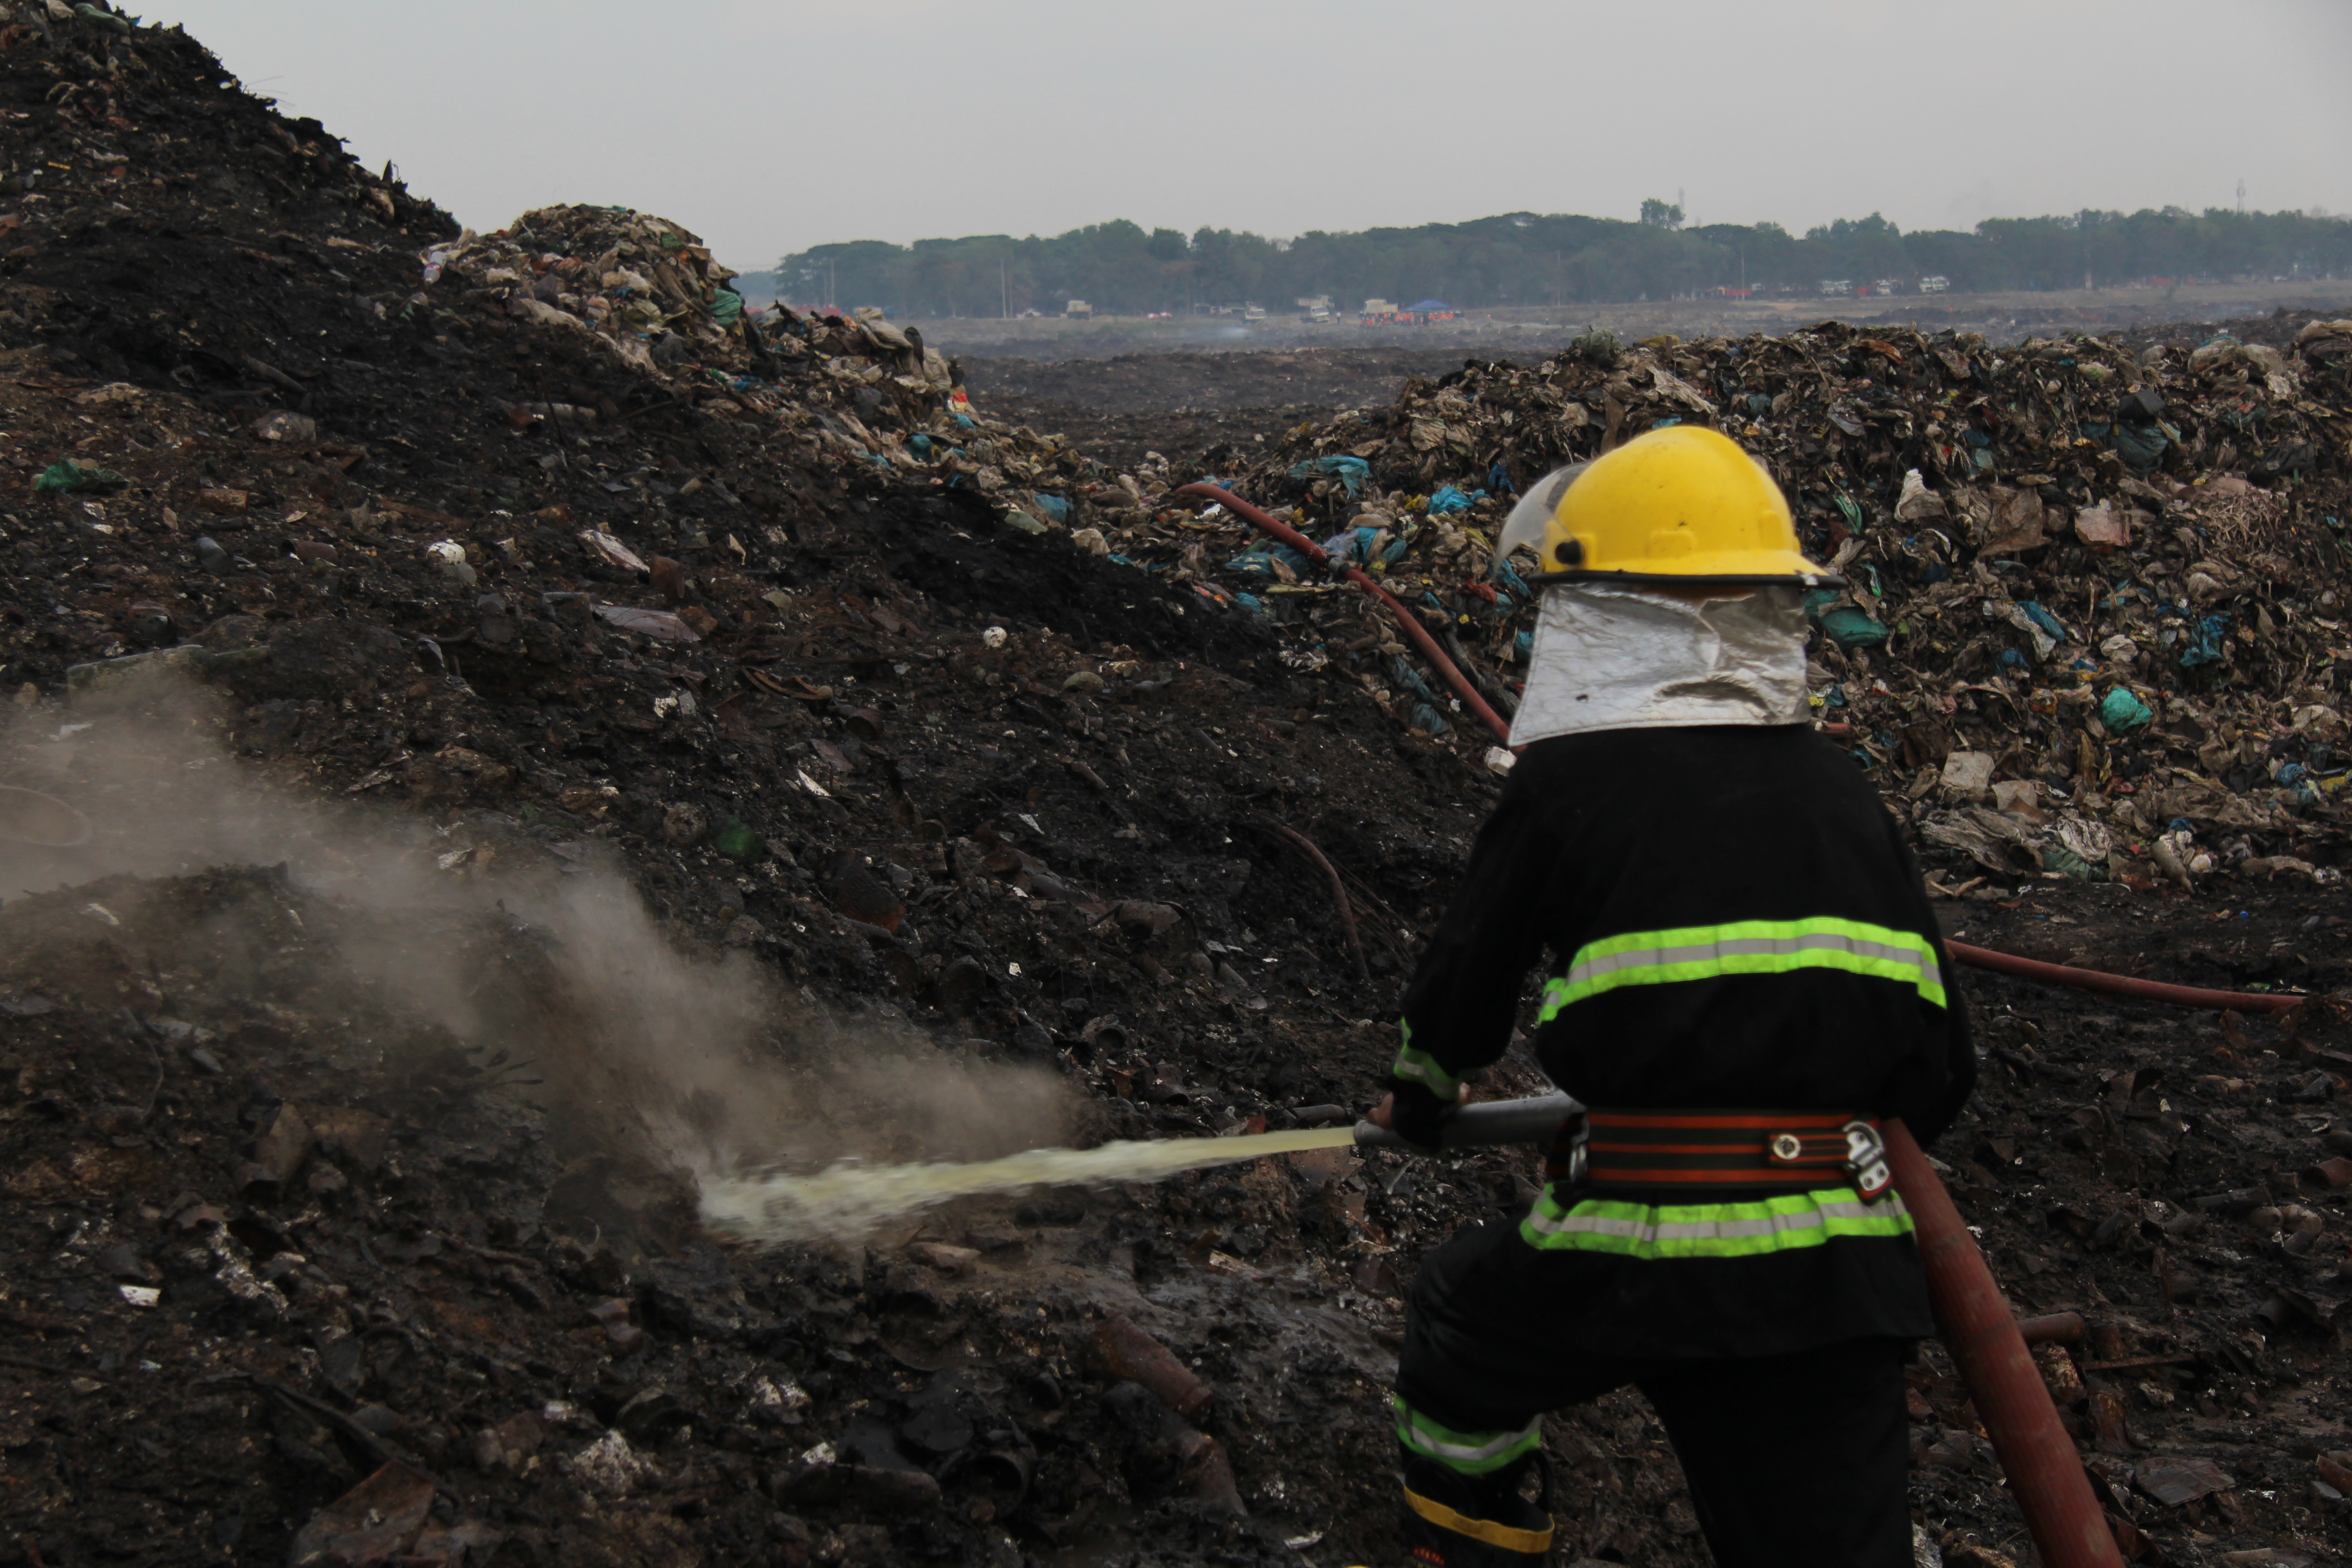 A firefighter sprays water at a plume of smoke rising from the ground inside the Htein Bin landfill on May 3, 2018.